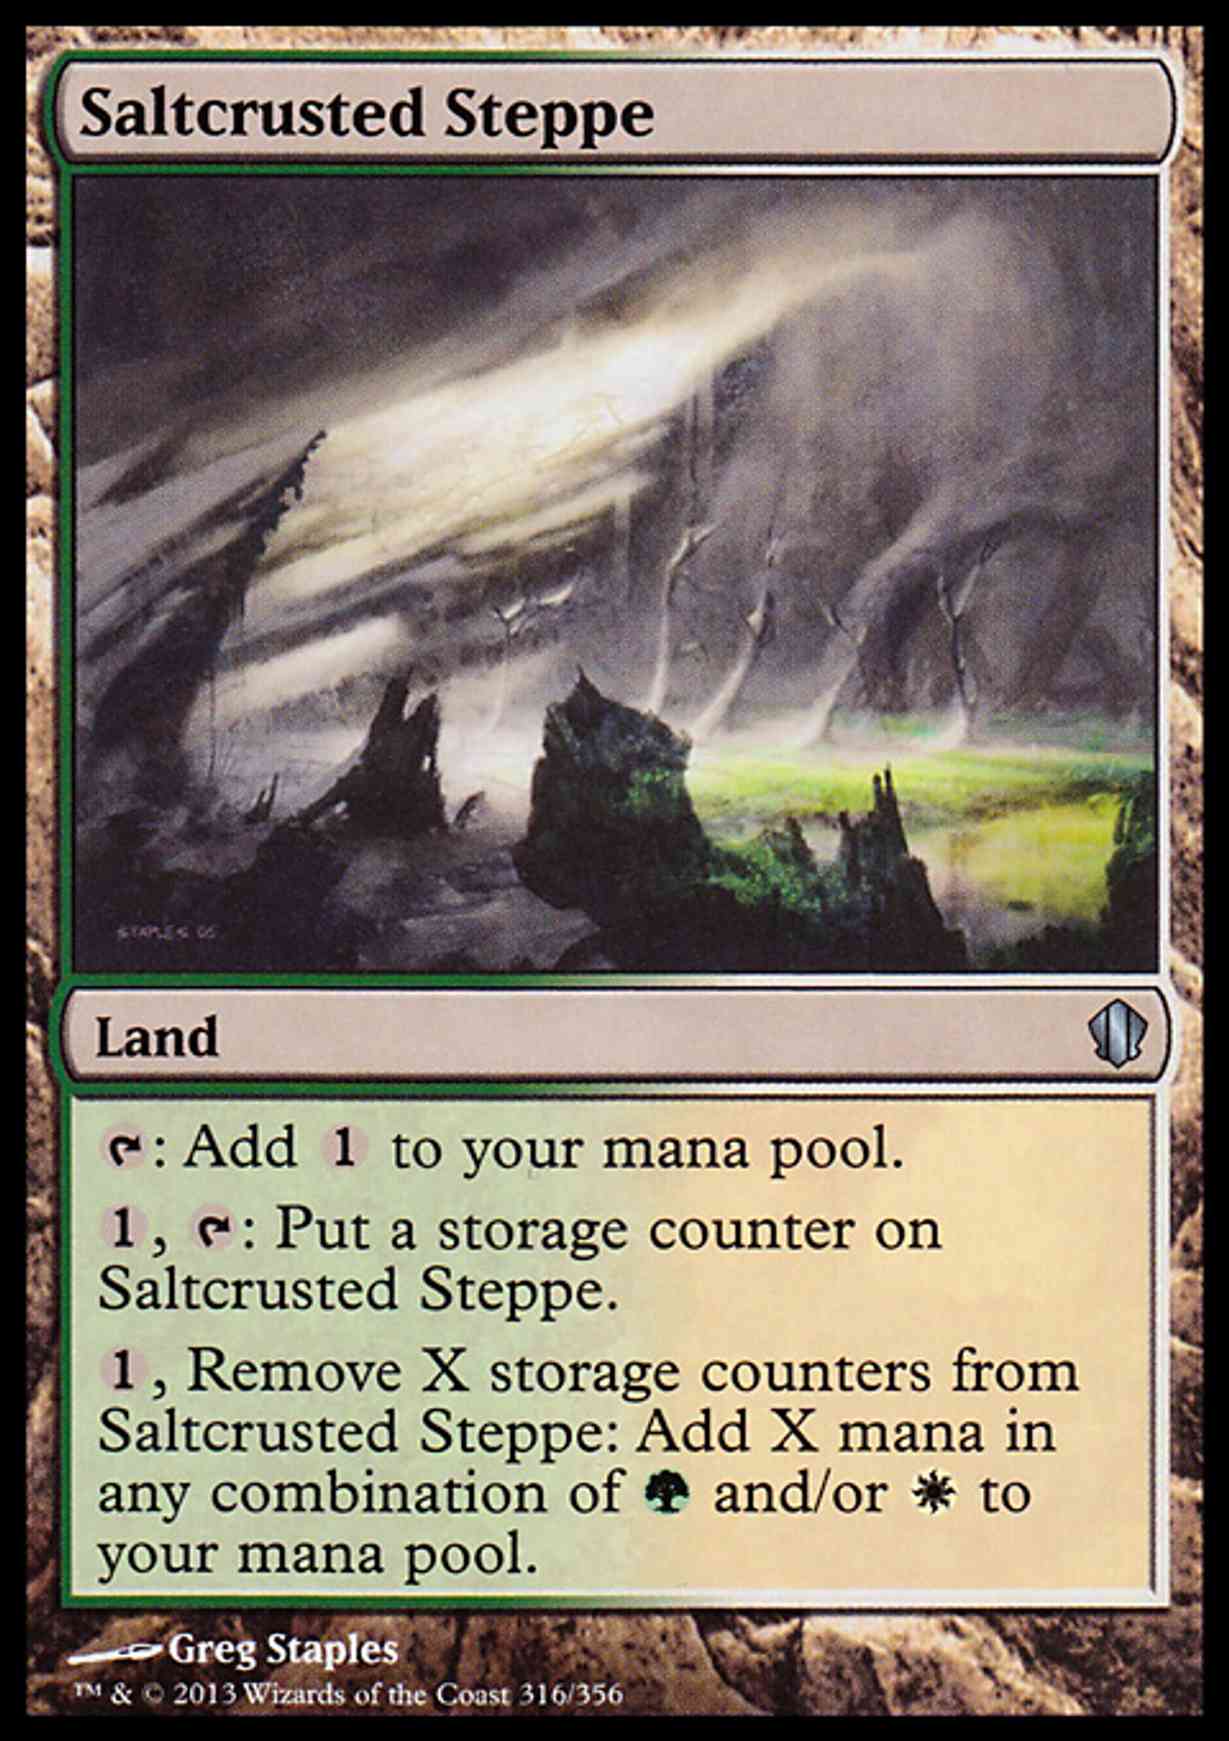 Saltcrusted Steppe magic card front